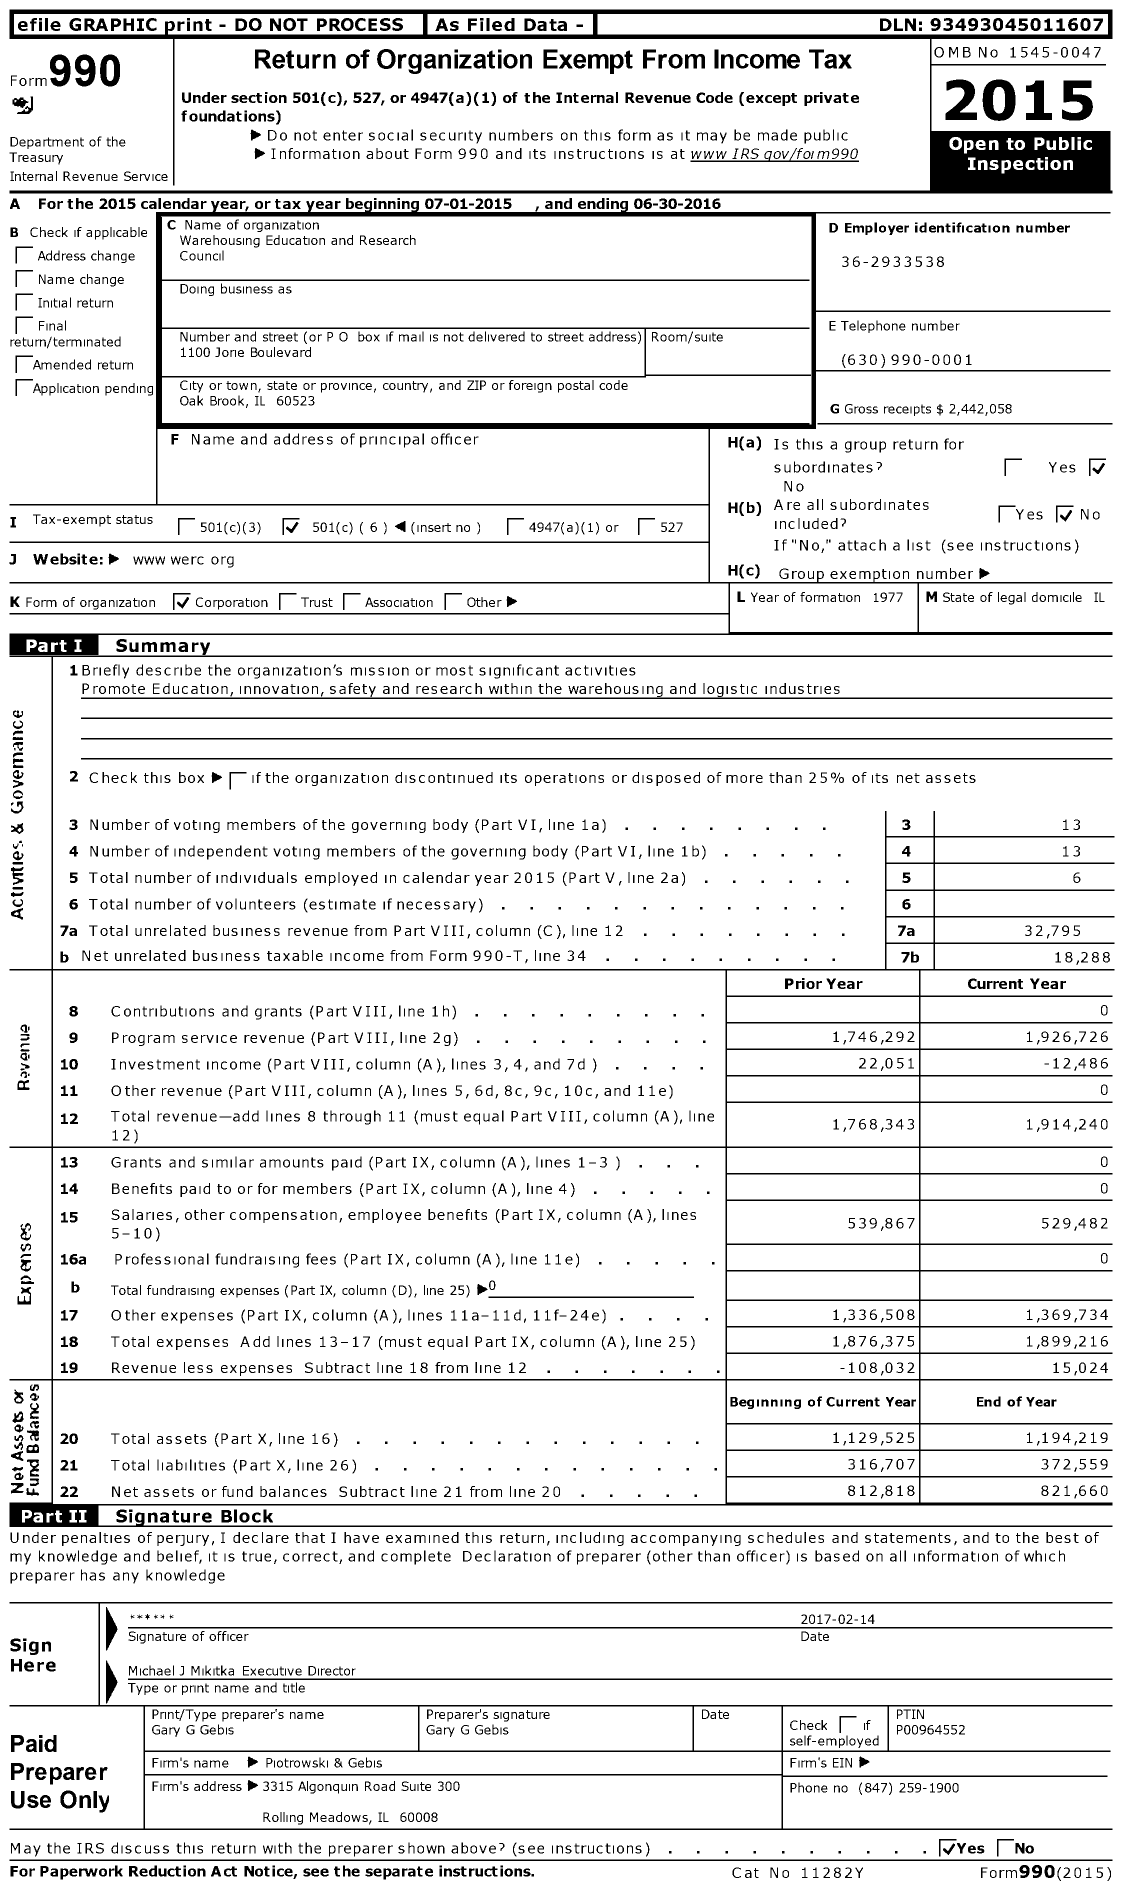 Image of first page of 2015 Form 990O for Warehousing Education and Research Council (WERC)